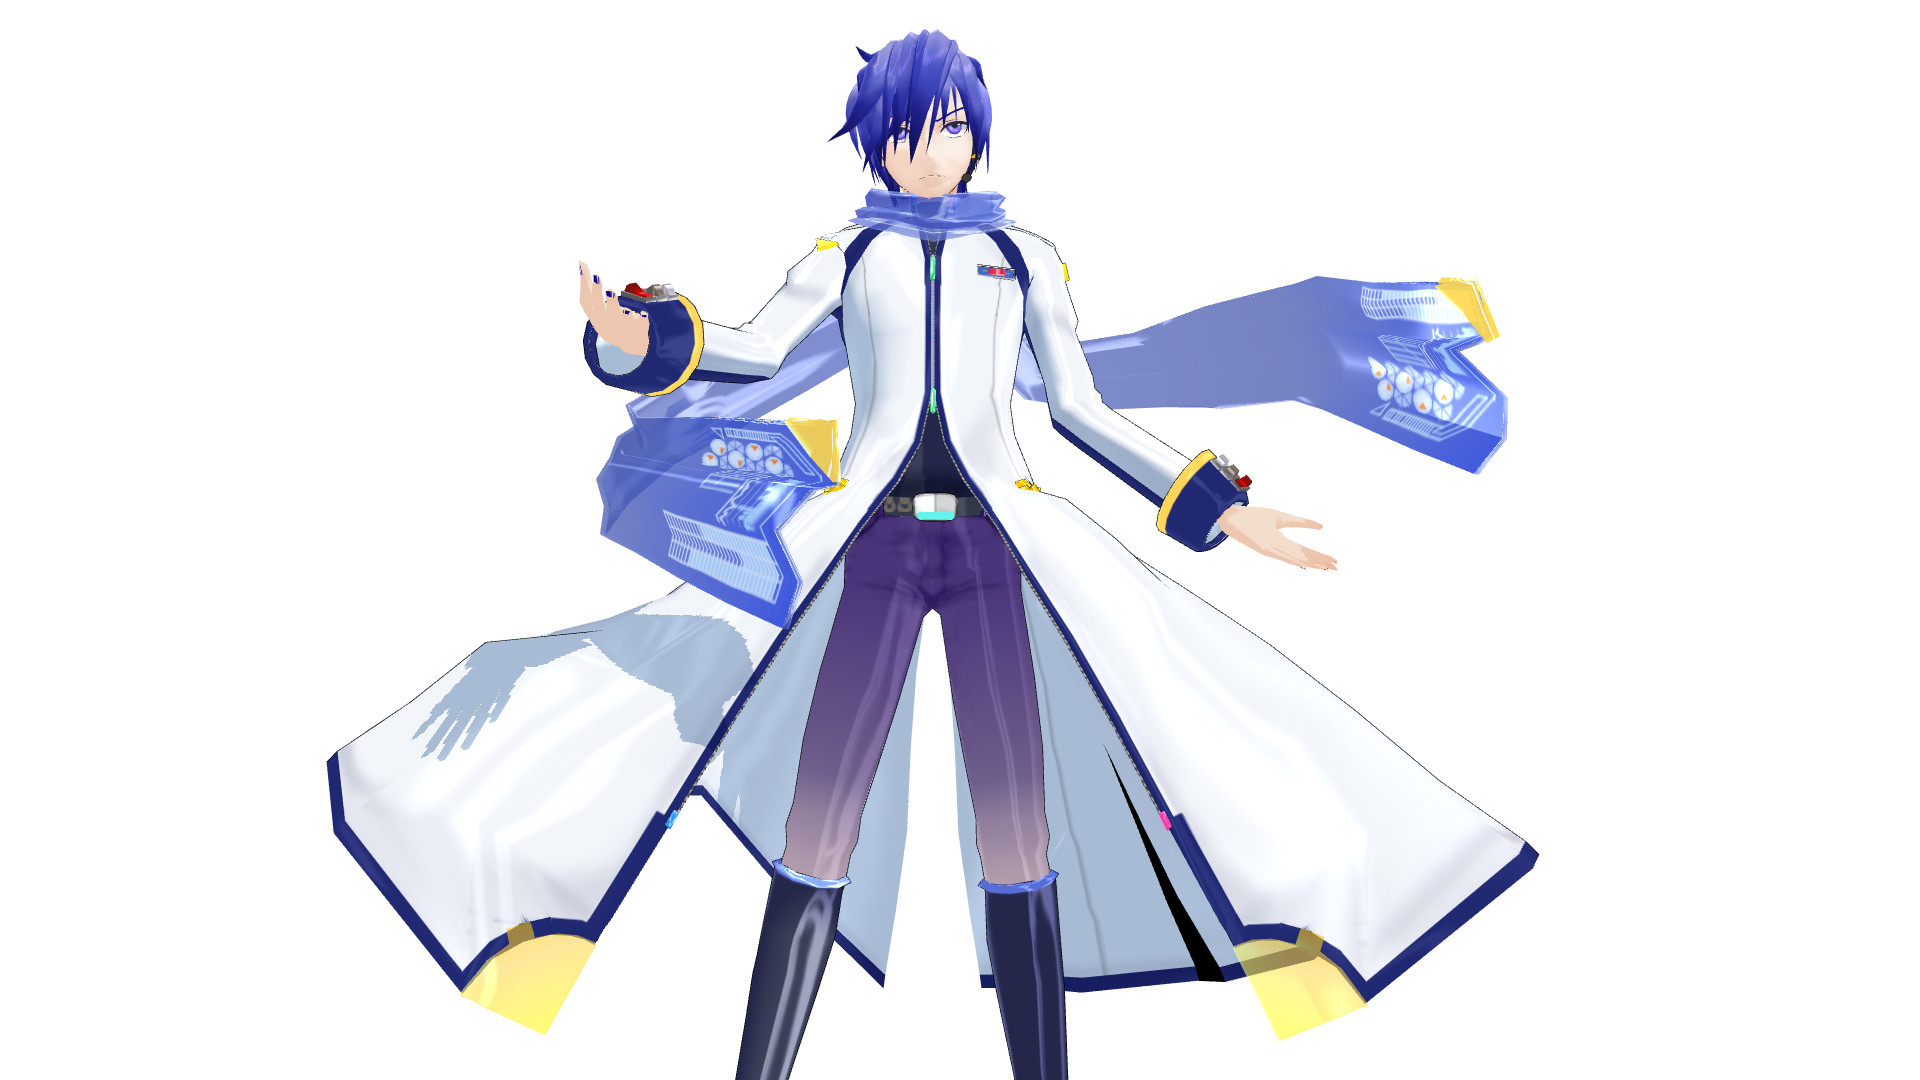 Kaito V3 model download MMD by Reon046 on DeviantArt. 